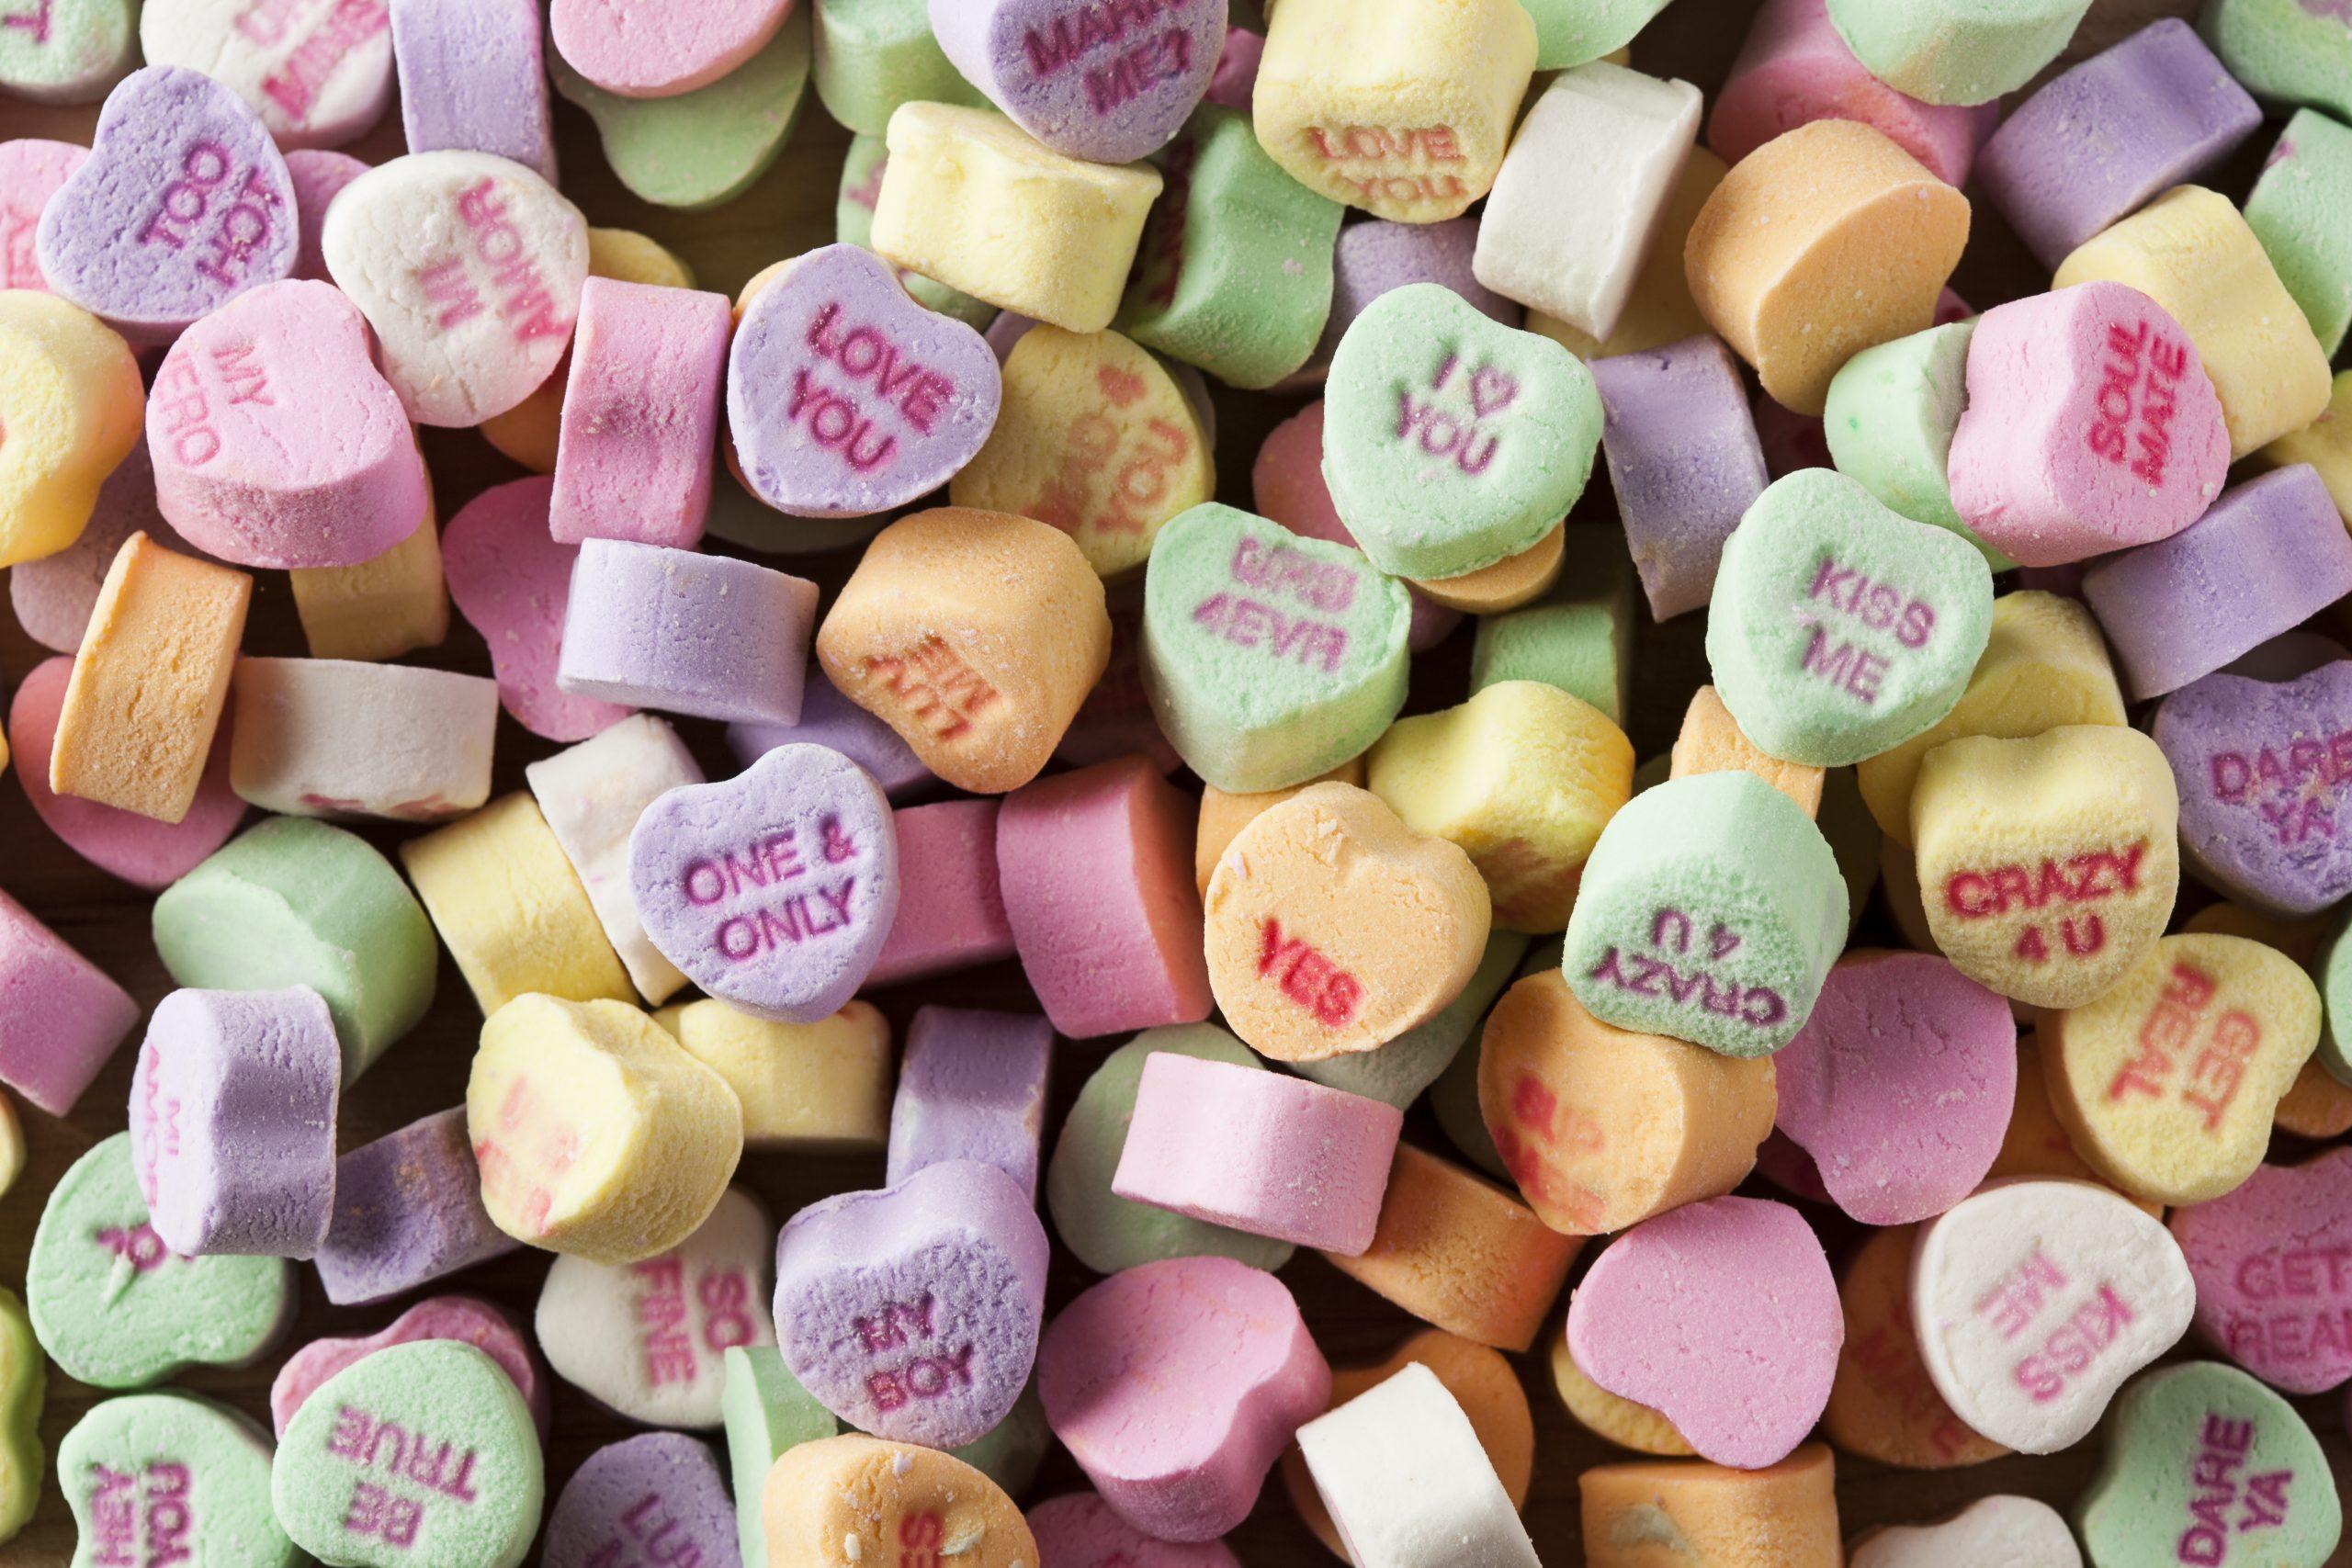 Skip Candies This Valentine’s Day. Your Child’s Future Self Will Thank You.